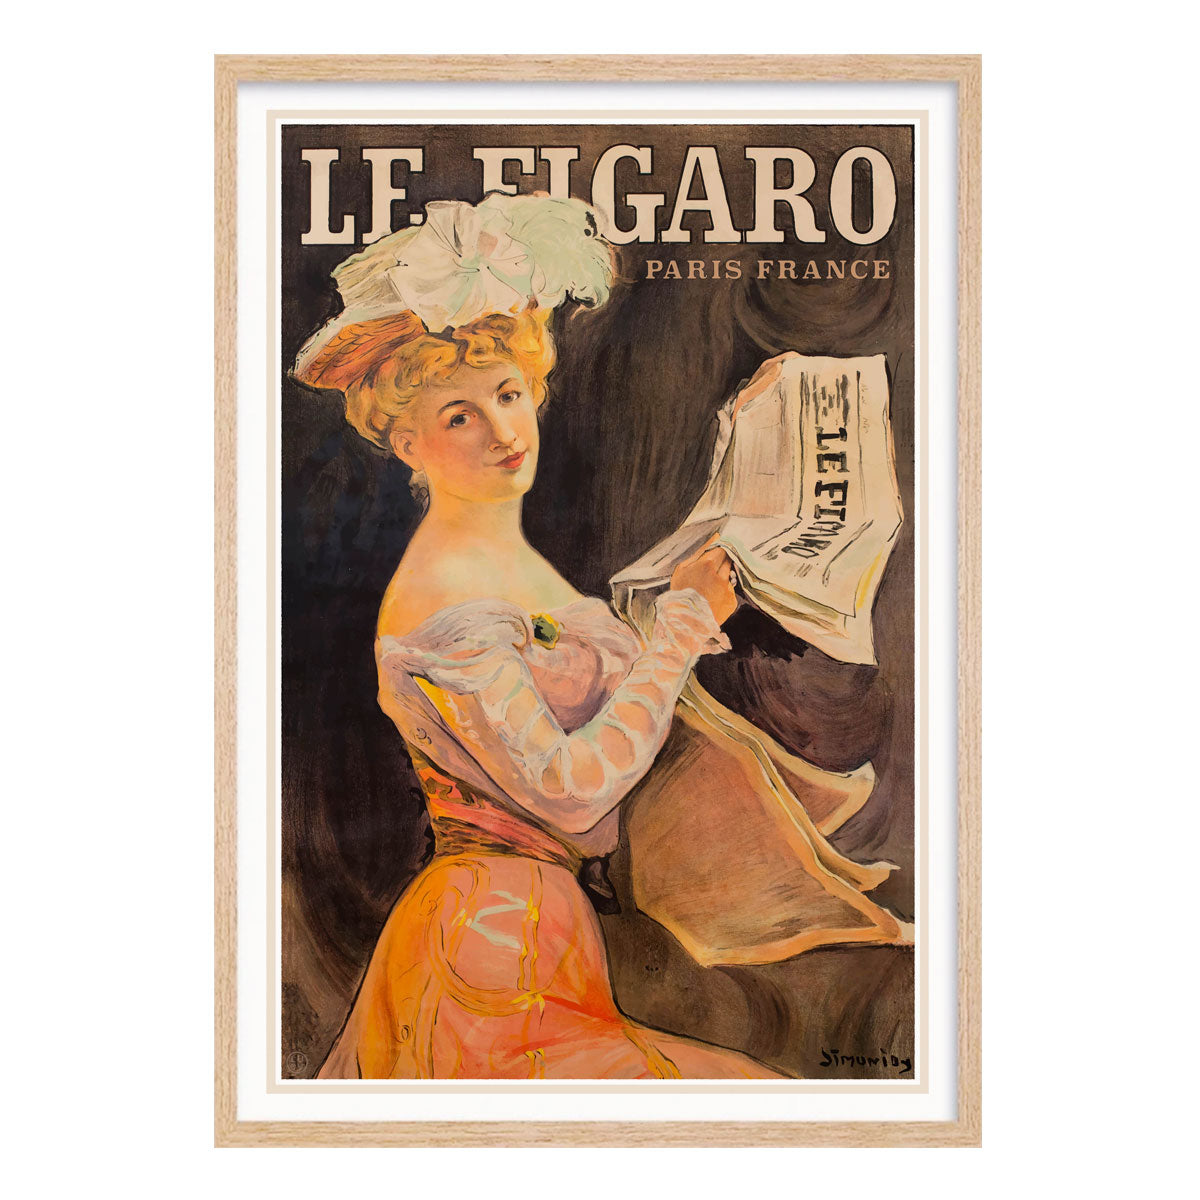 Le Figaro France reto vintage advertising poster print in oak frame from Places We Luv